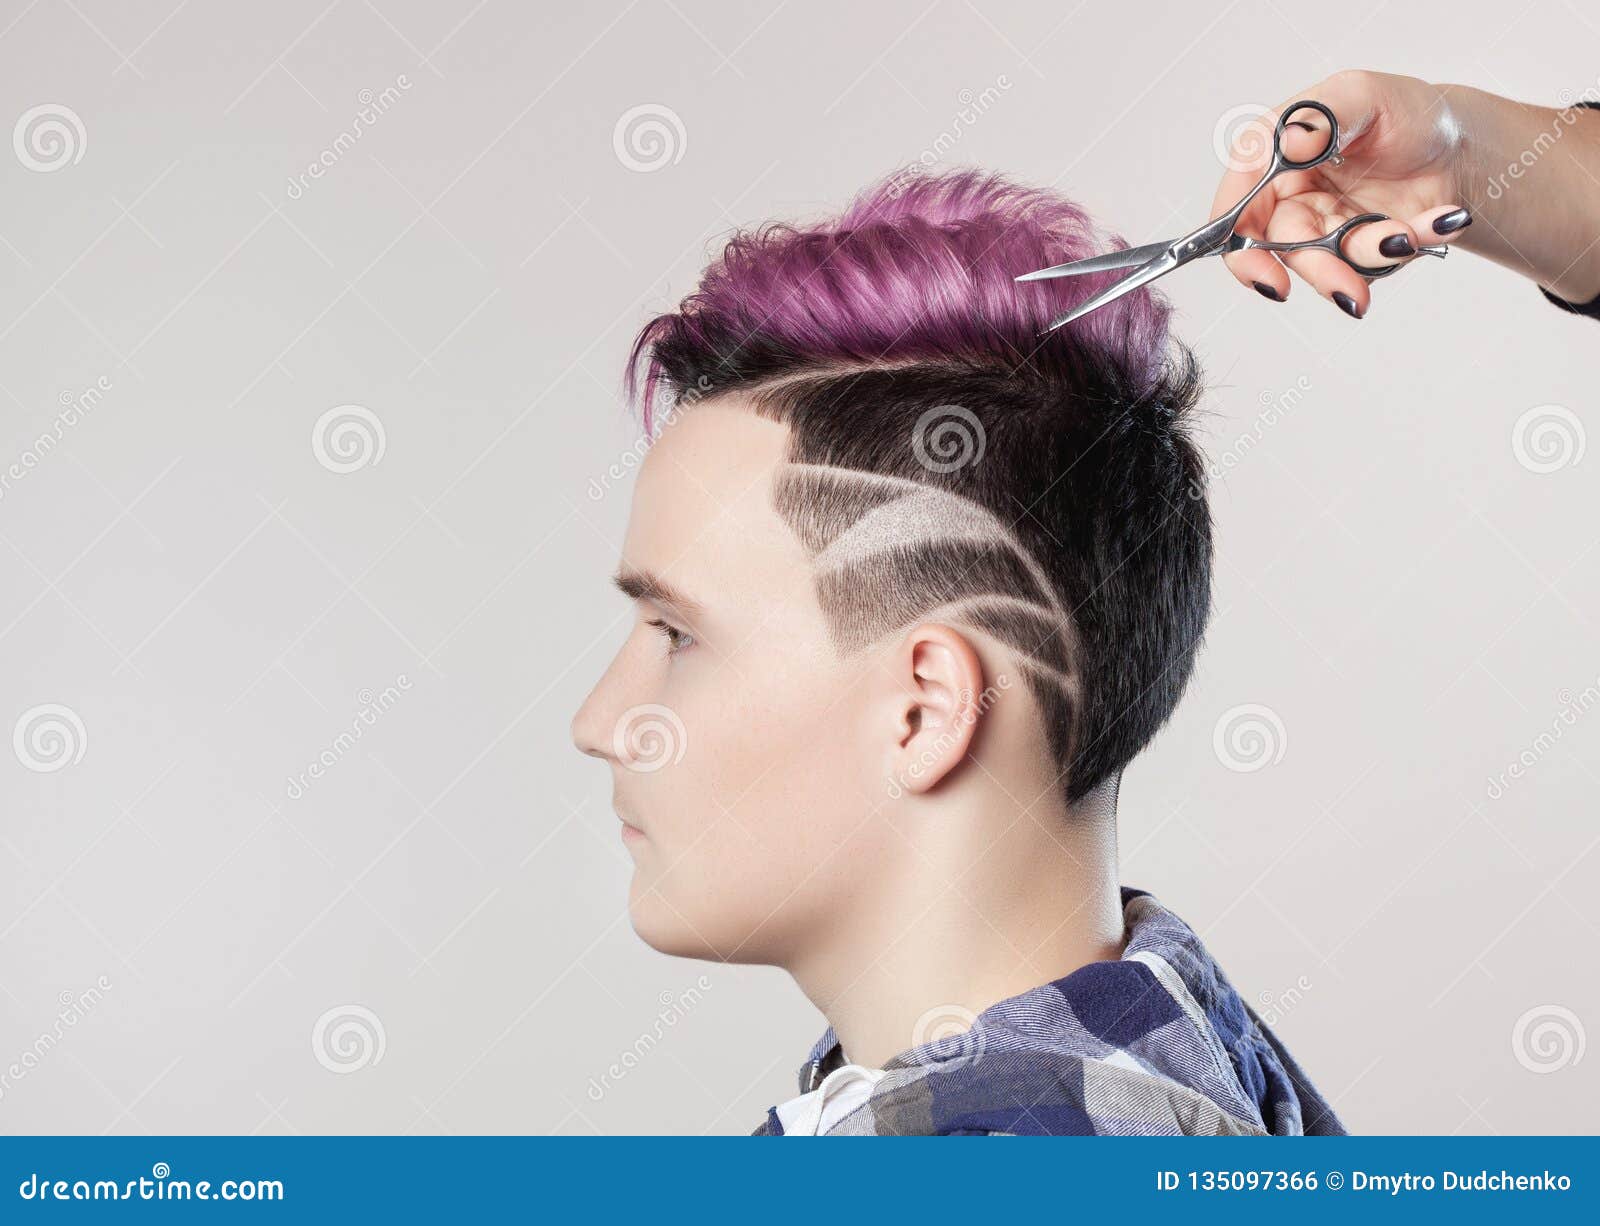 Hairdresser Cuts Hair Portrait Of A Beautiful Young Teenager With